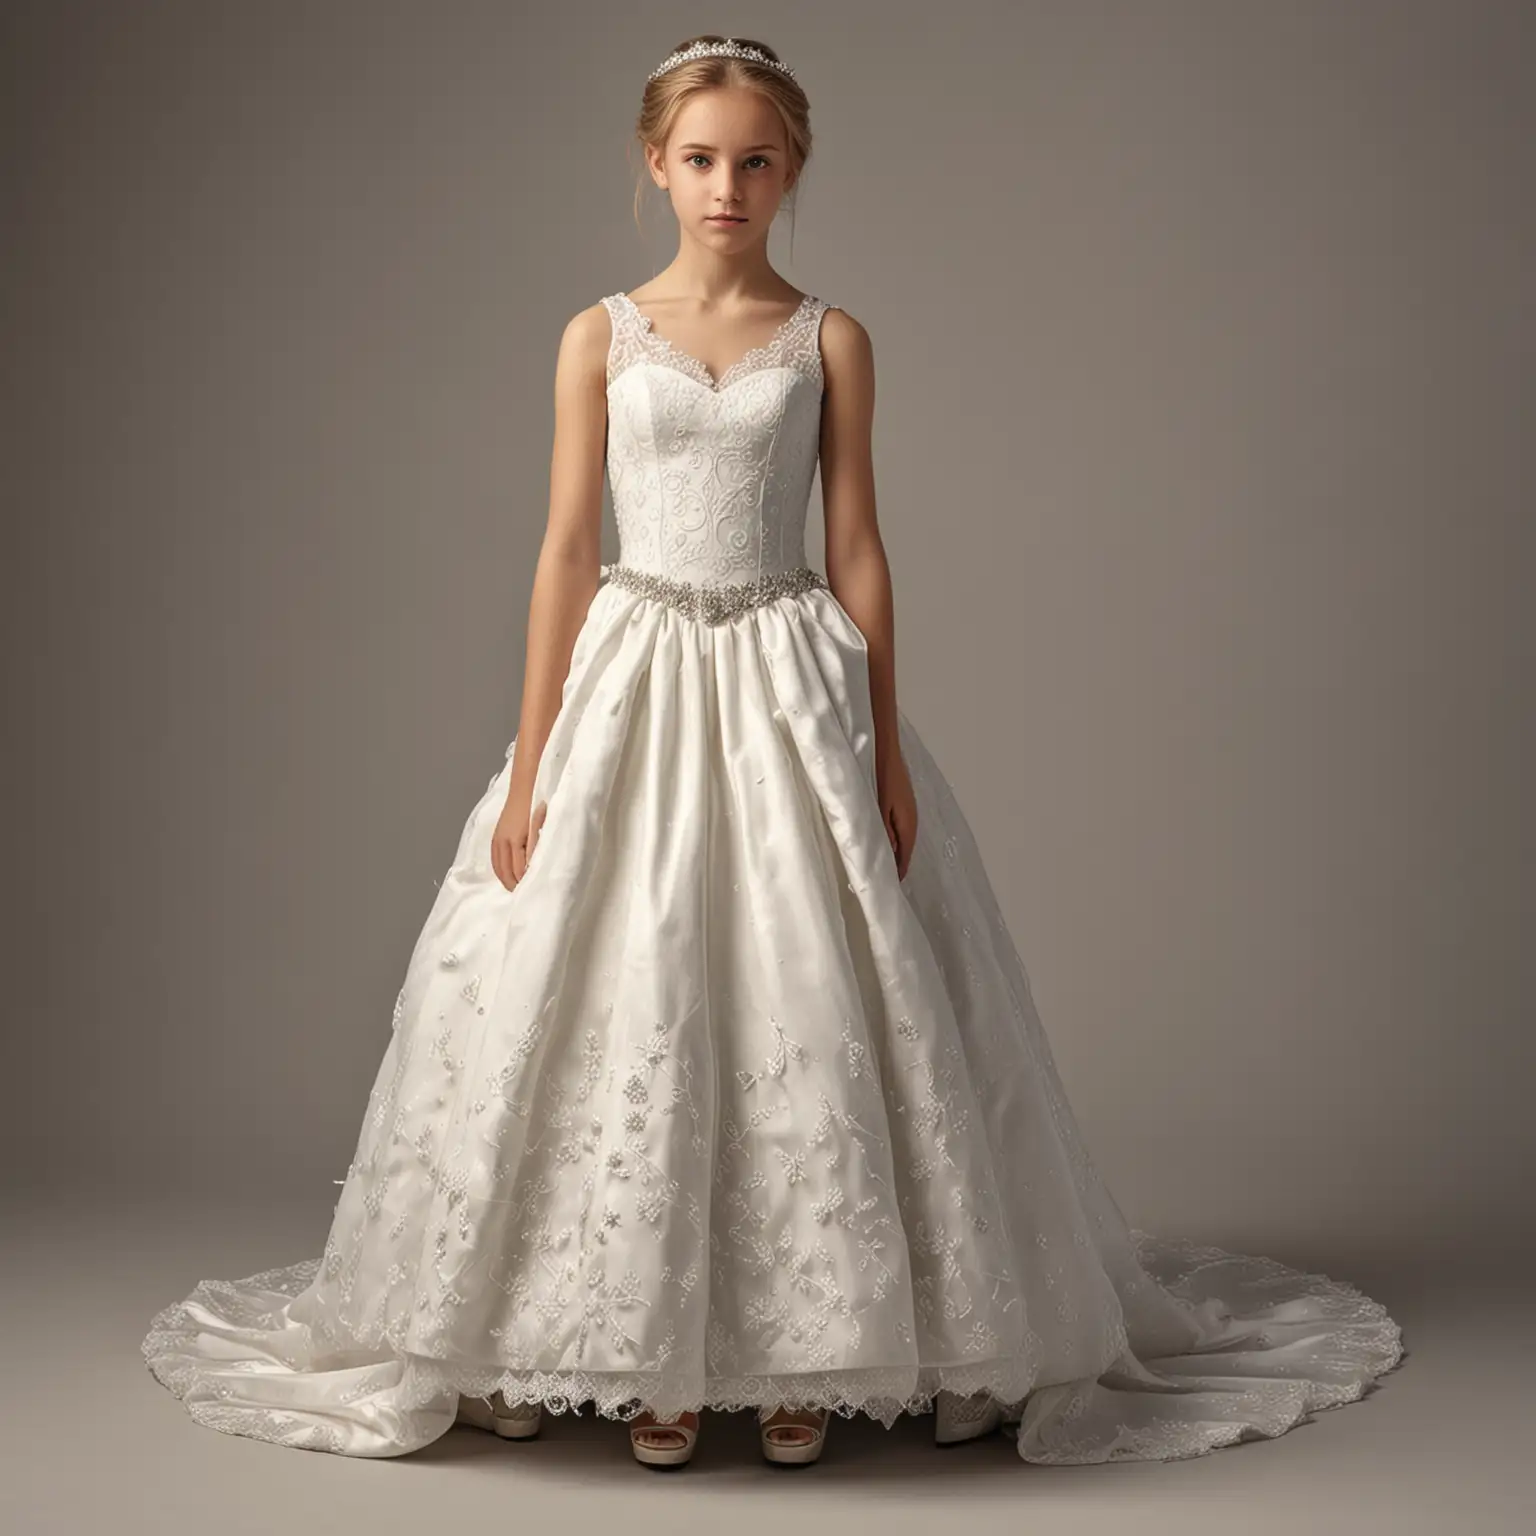 hyperrealistic image. full length shot of a pretty 14 year old girl in wedding dress, wearing nice shoes. 